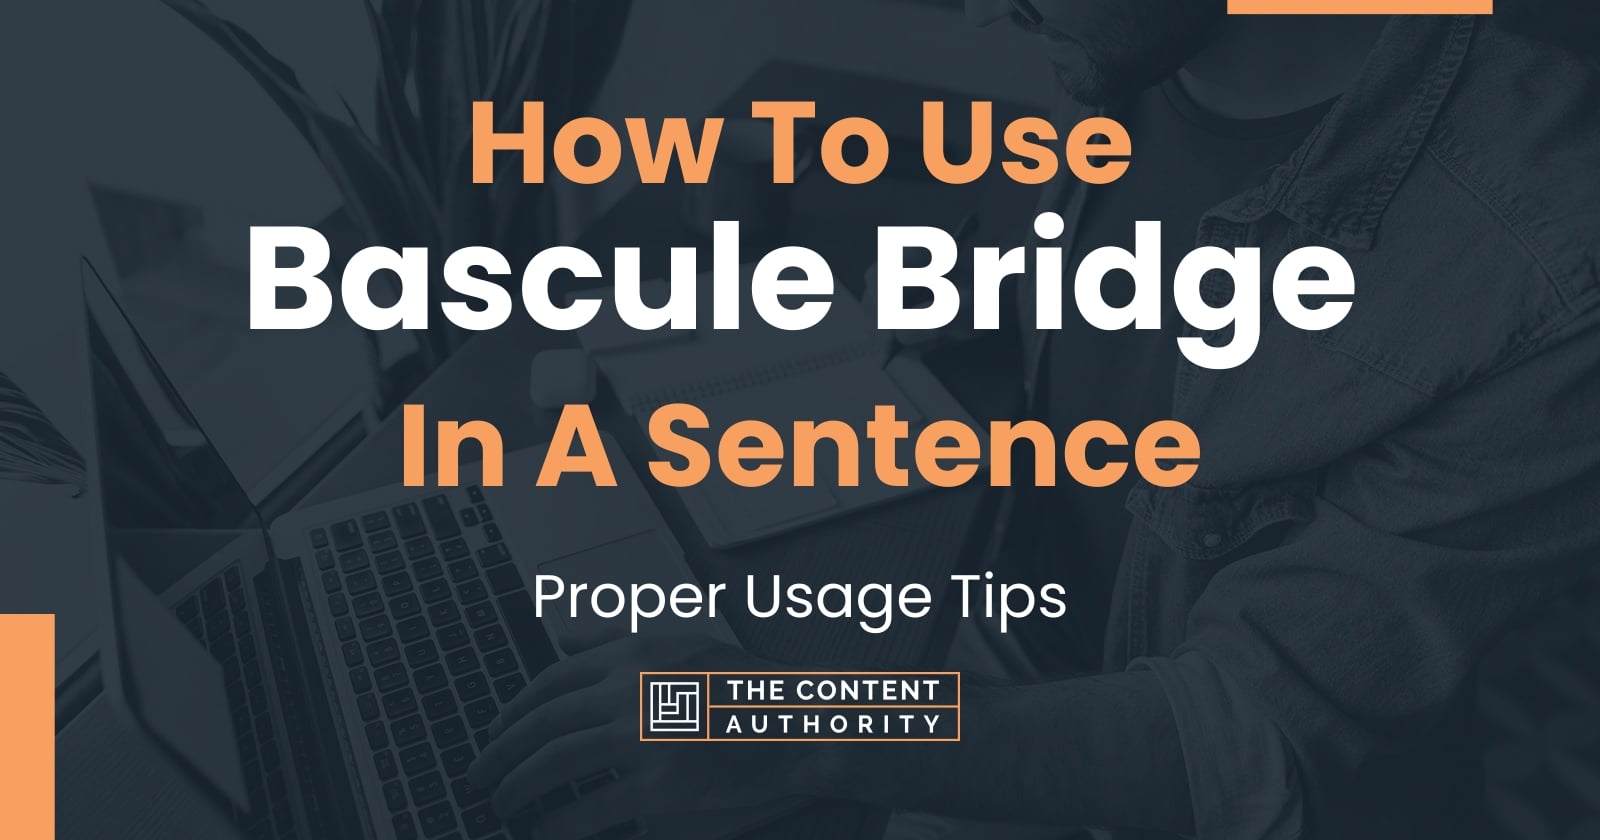 how-to-use-bascule-bridge-in-a-sentence-proper-usage-tips